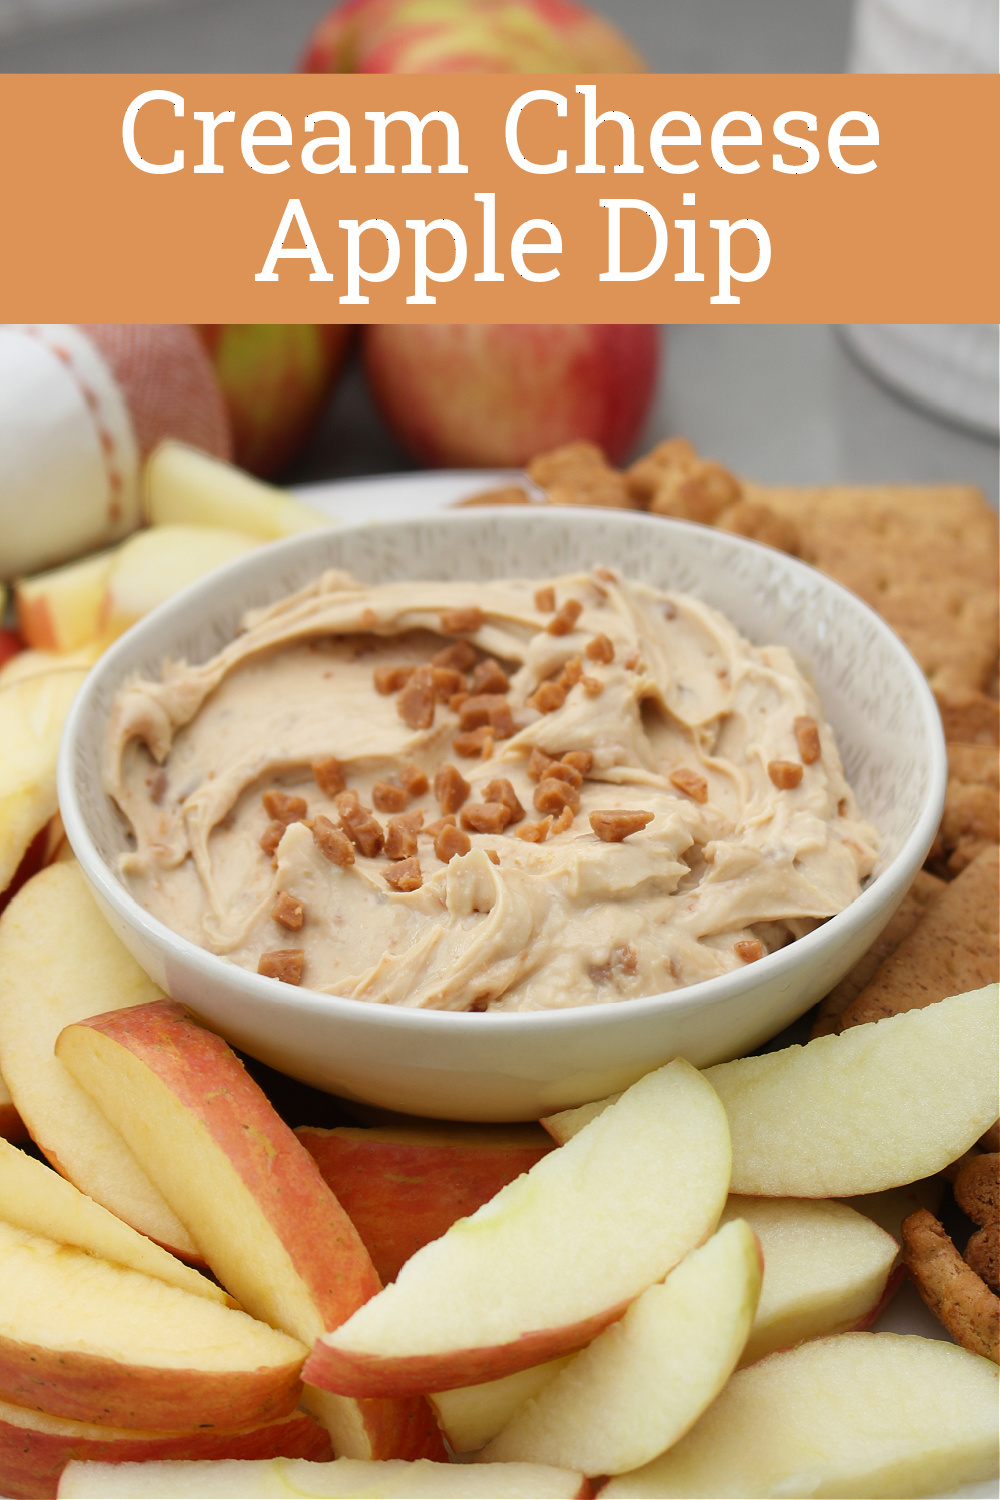 Cream cheese apple dip on a plate with apples and graham crackers.